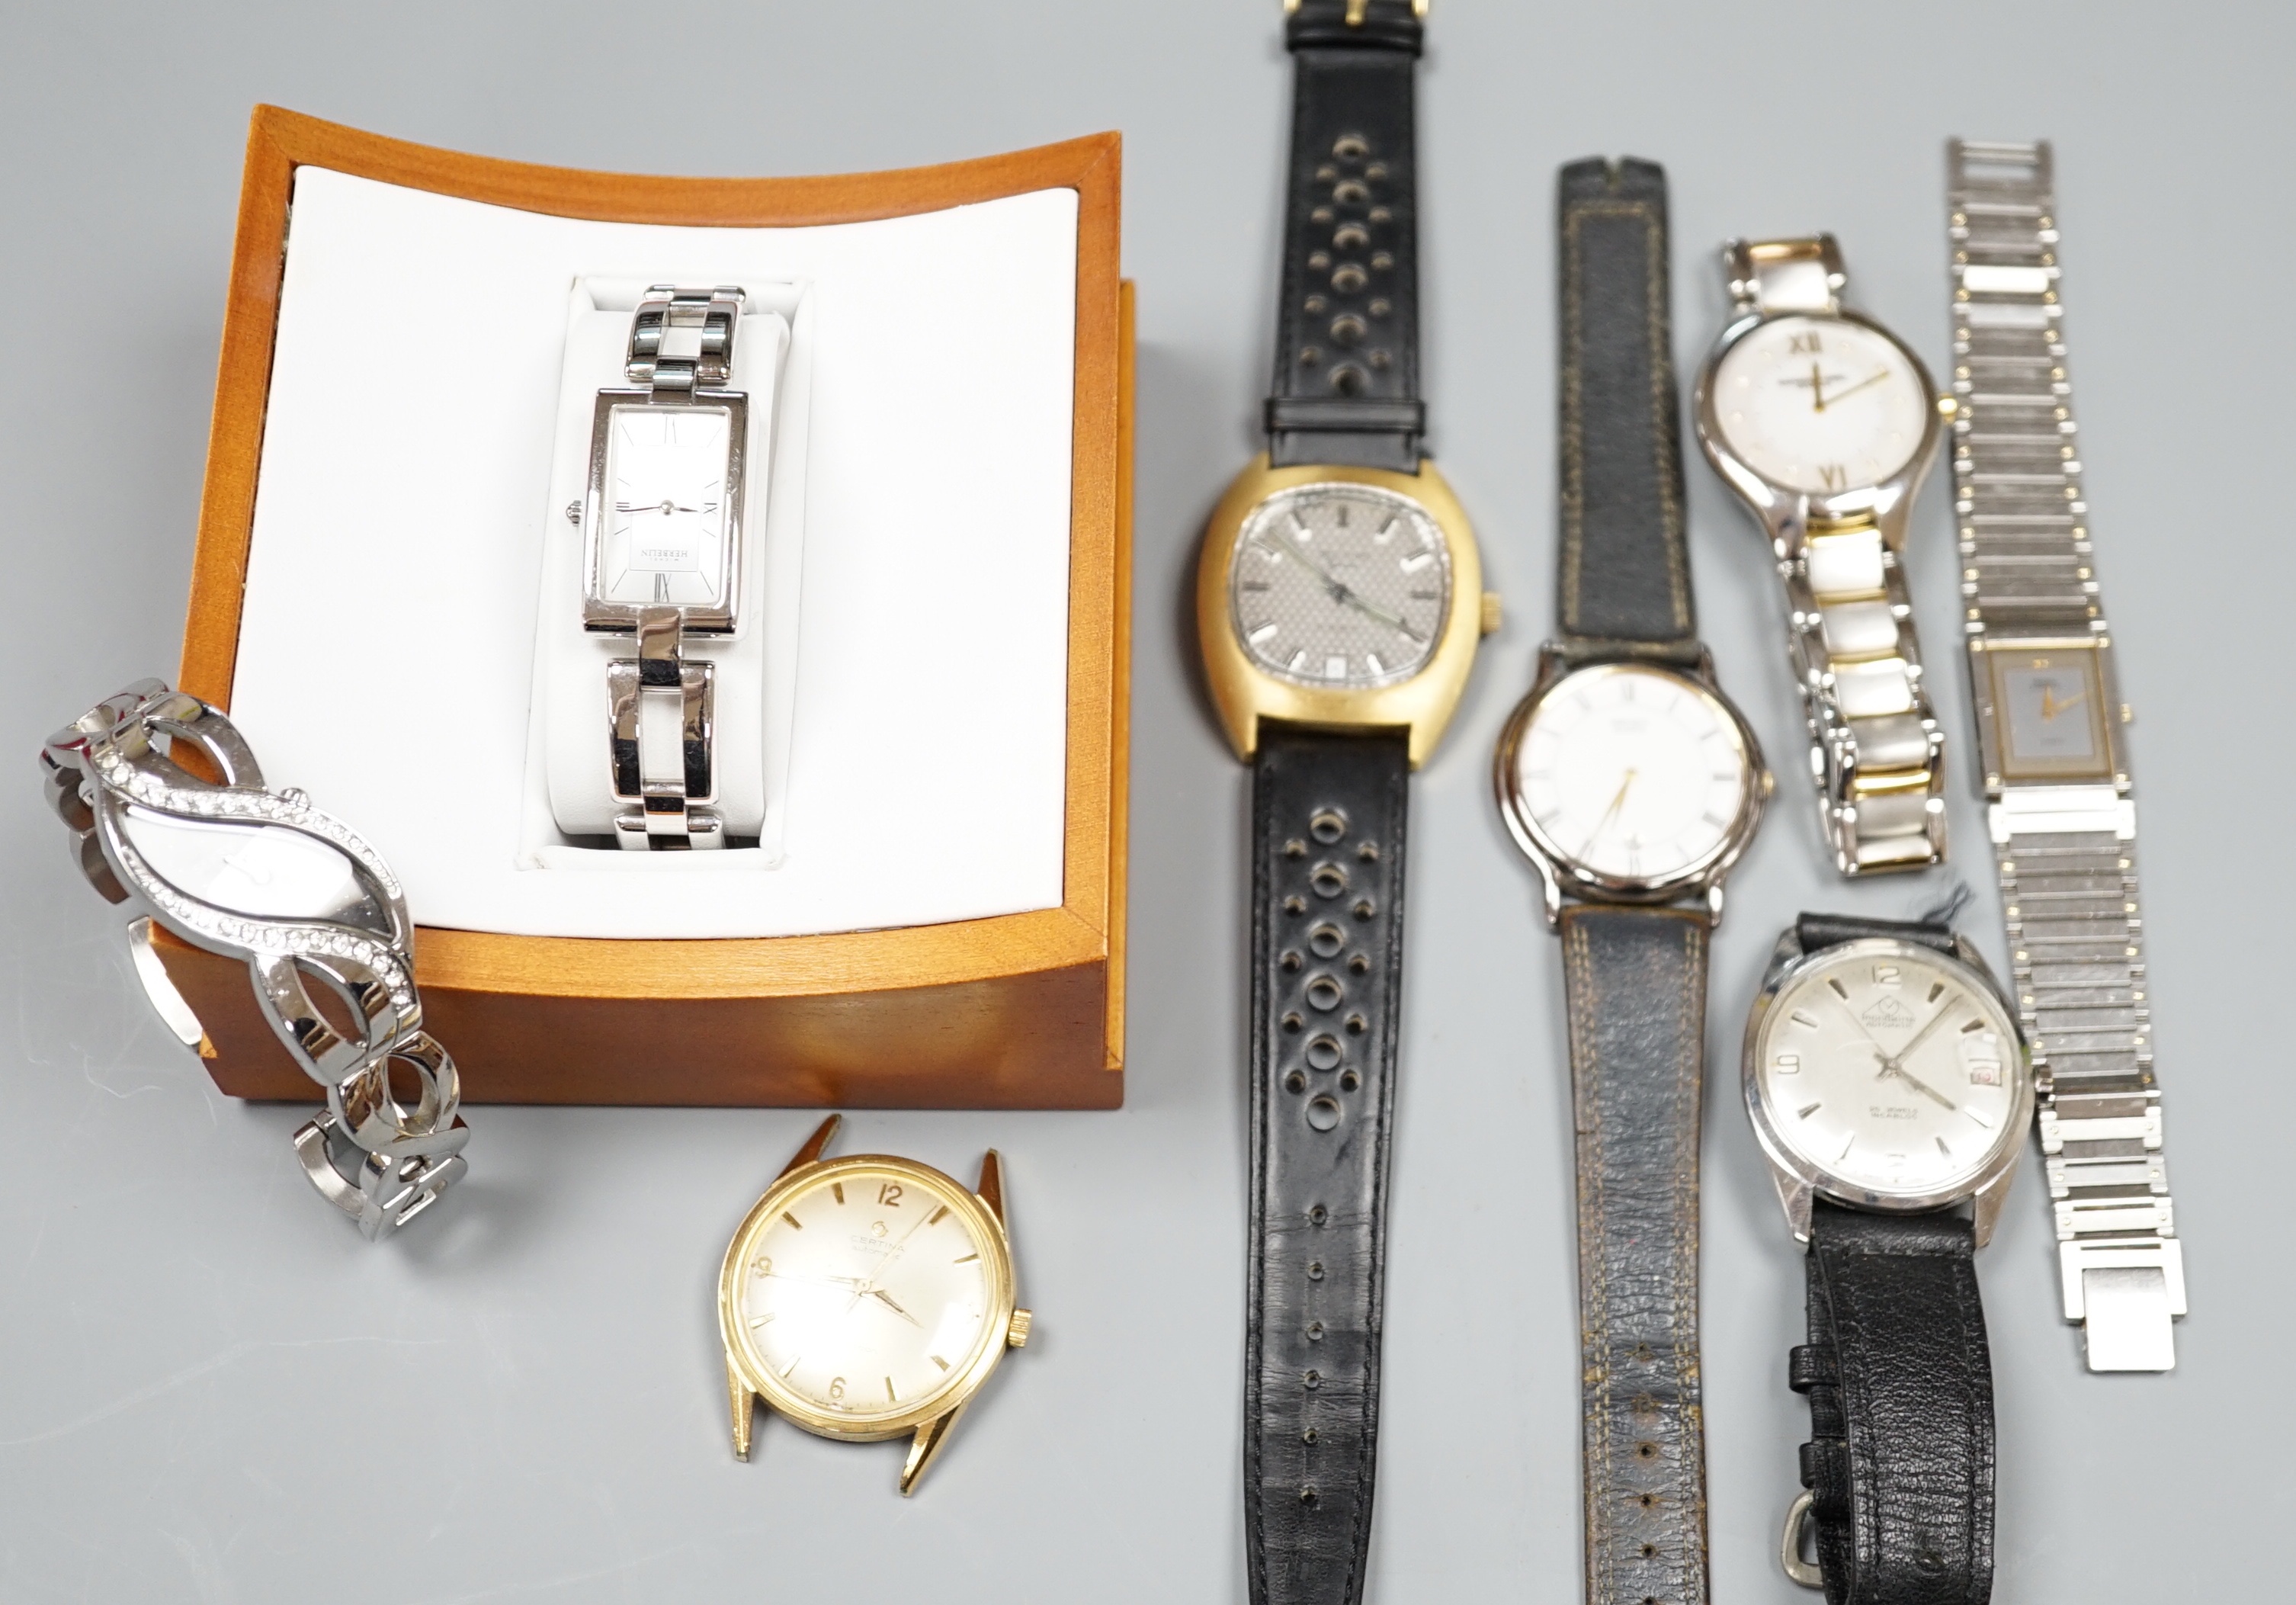 A collection of lady's and gentleman's wrist watches including Raymond Weil, Seiko, Certina and Mondaine automatic.